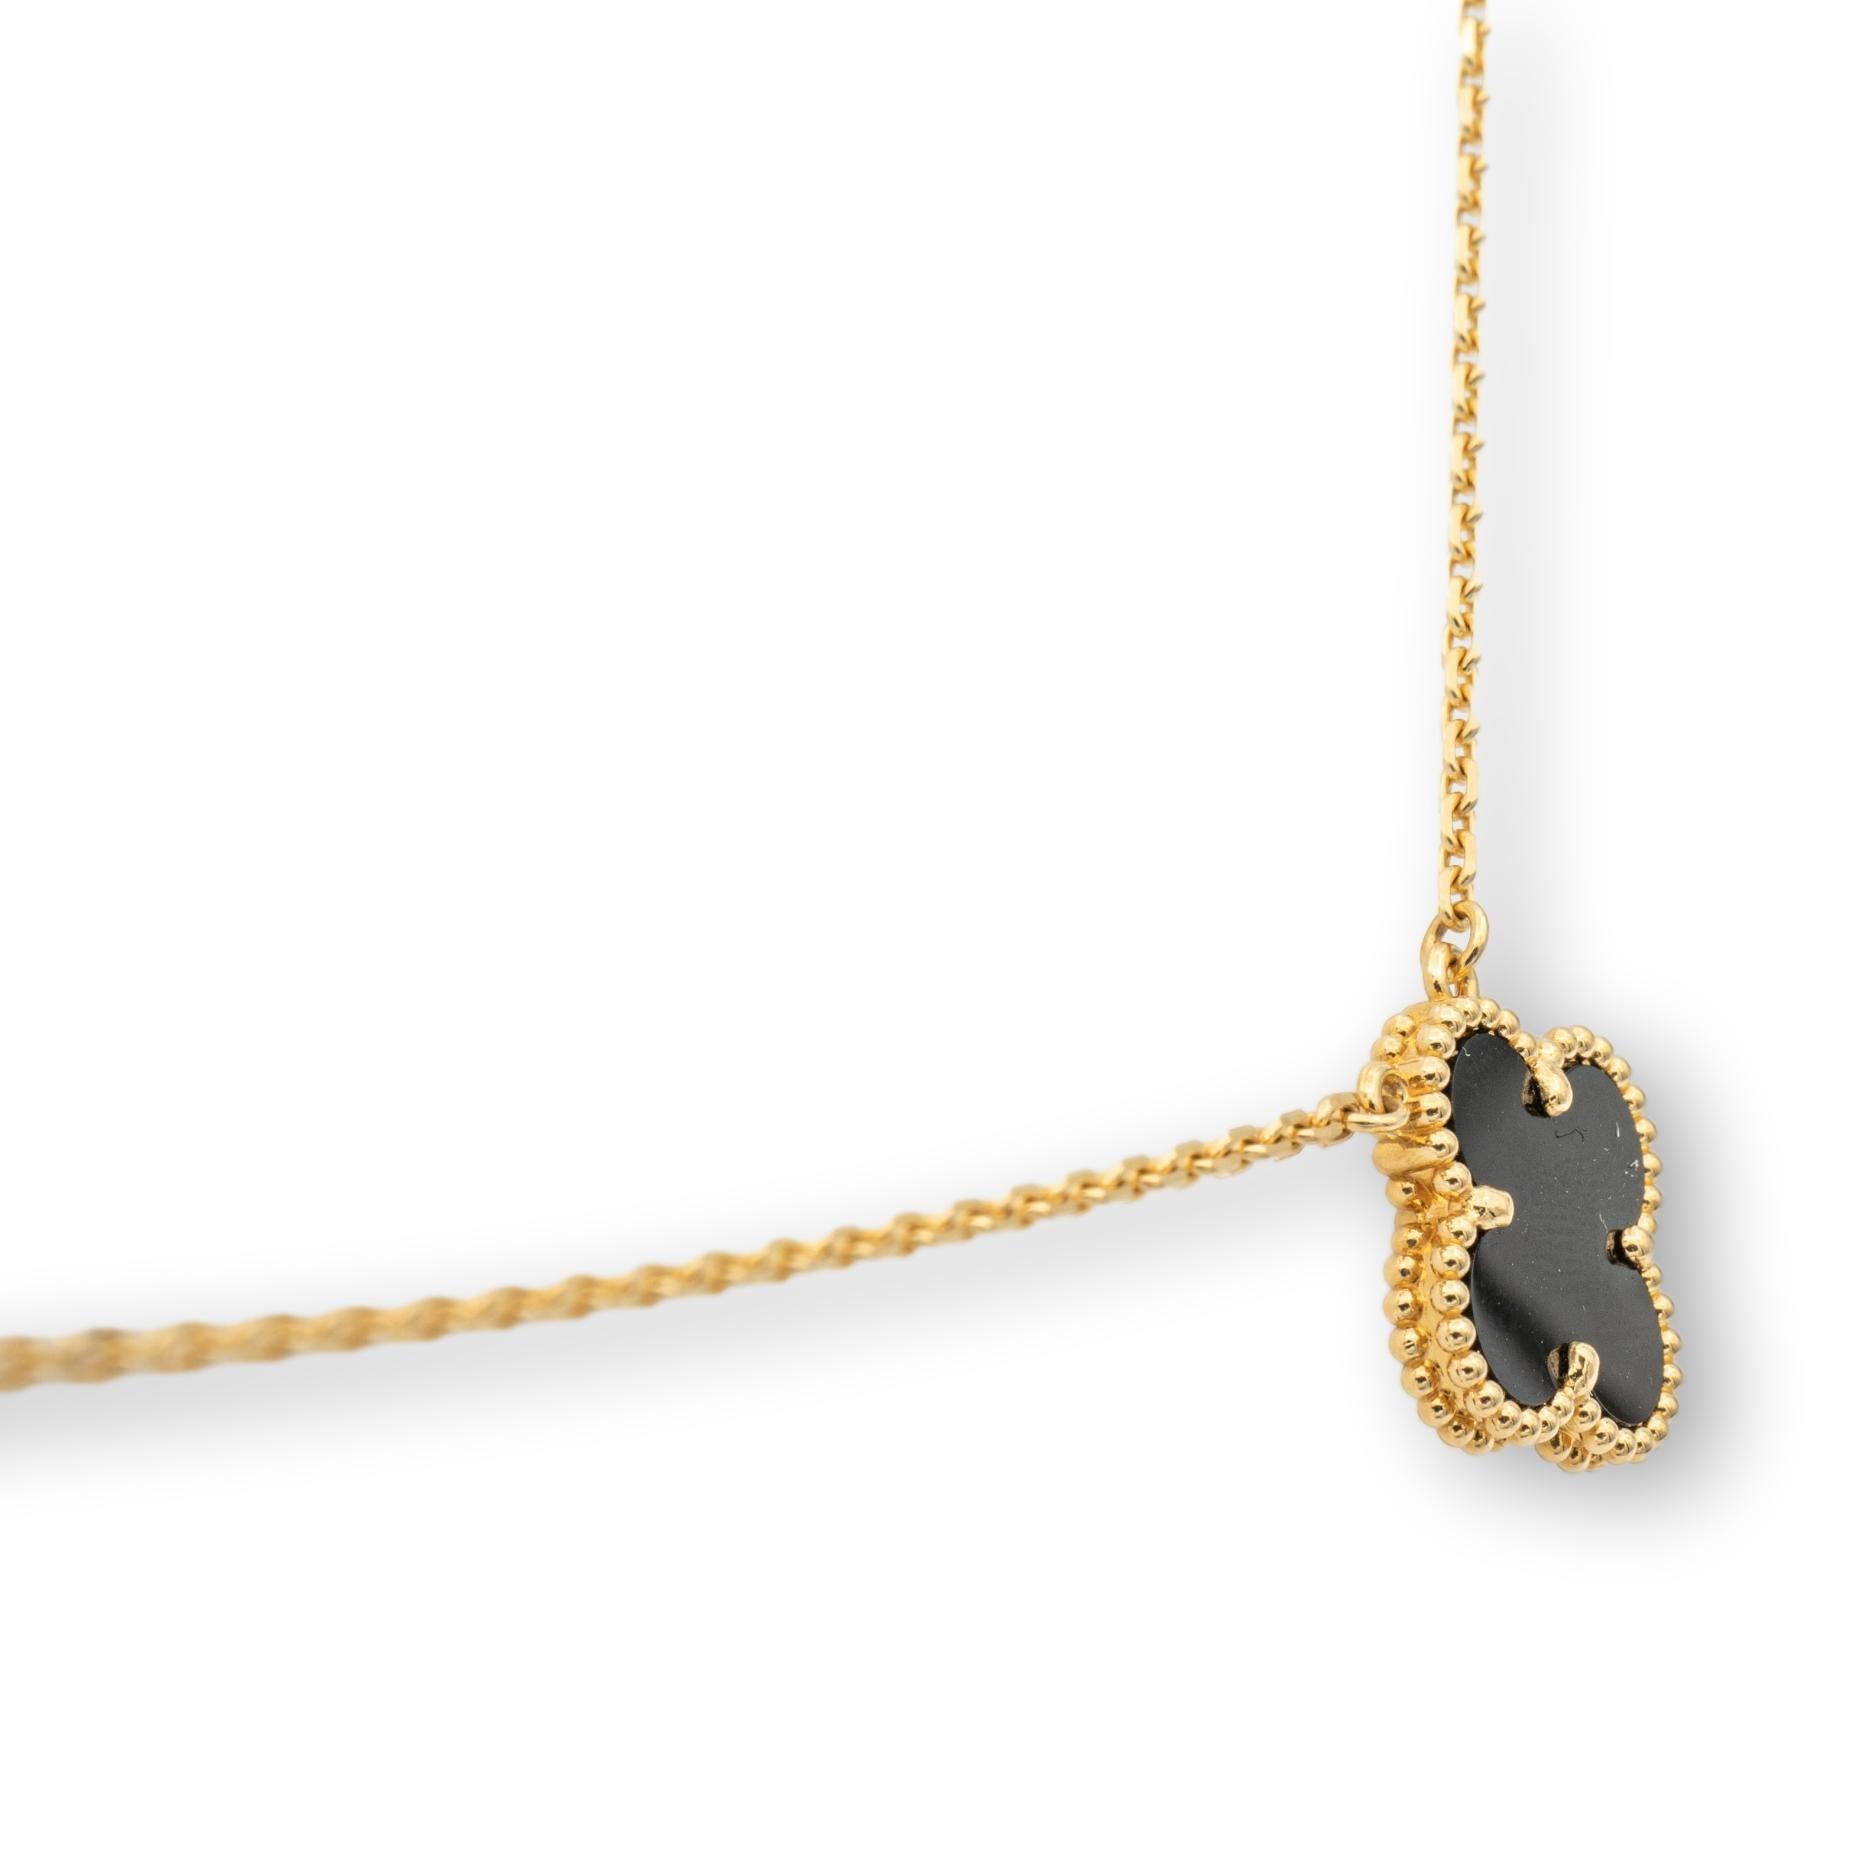 Van Cleef & Arpels necklace from the Vintage Alhambra collection finely crafted in 18 karat yellow gold featuring a 15 mm four leaf clover black onyx motif pendant hanging off a 16 inch link chain with lobster closure. This pendant is in new